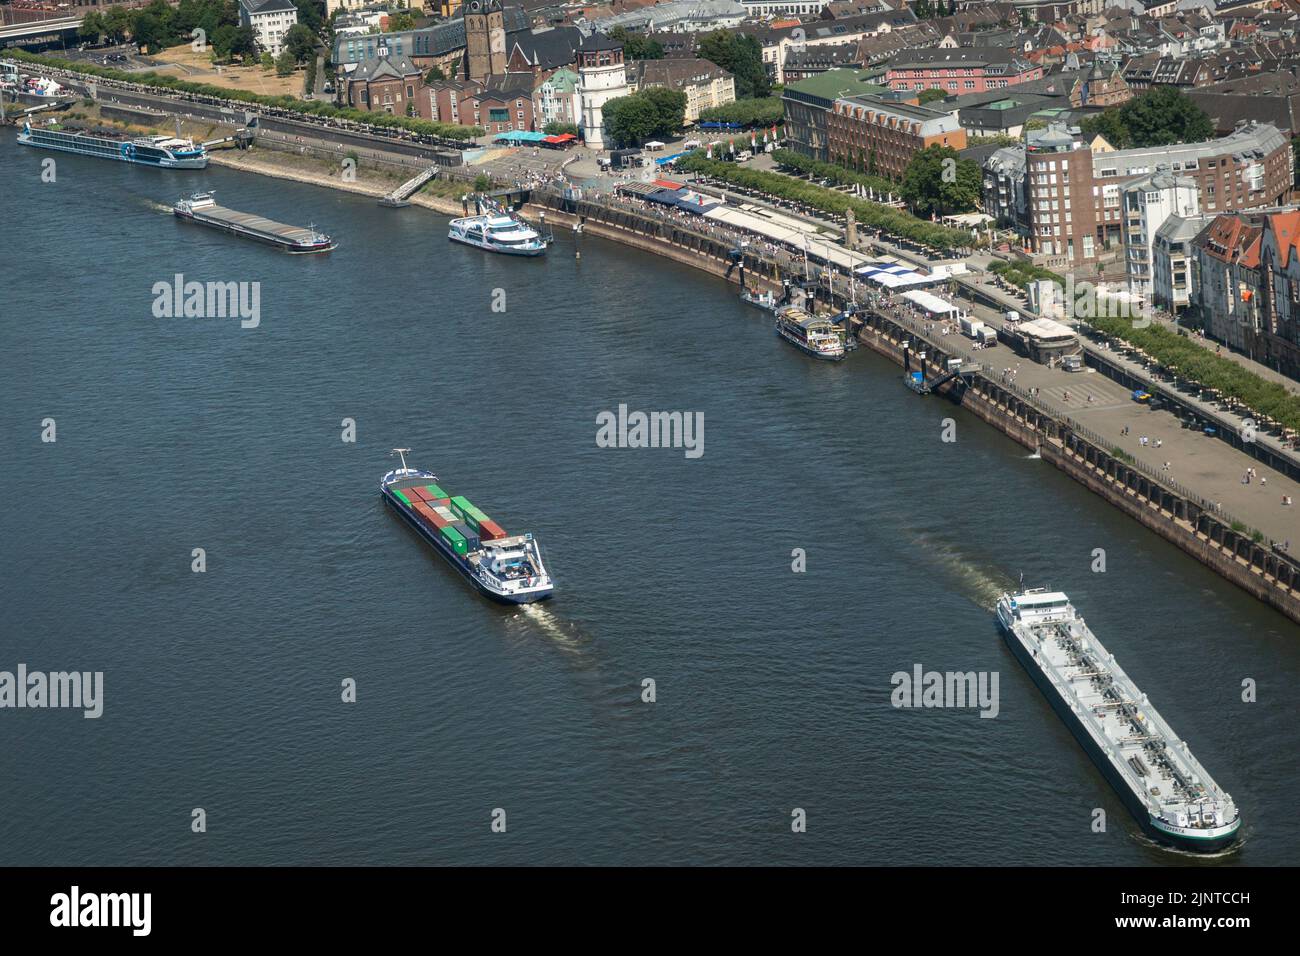 Düsseldorf, NRW, Germany, 13th Aug 2022. The riverbanks look parched and wider from above, whilst freight vessels have to carefully navigate the narrowed shipping lane. The River Rhine, one of the busiest inland waterways in the world, has been strongly affected by the ongoing drought and resulting low water levels, caused by prolonged heat of up to 40 degrees and very little rain in the last few weeks. The shipping lane has narrowed down considerably, slowing down traffic, most vessels have also had to considerably reduce their freight weight, leading to supply issues and higher shipping pric Stock Photo